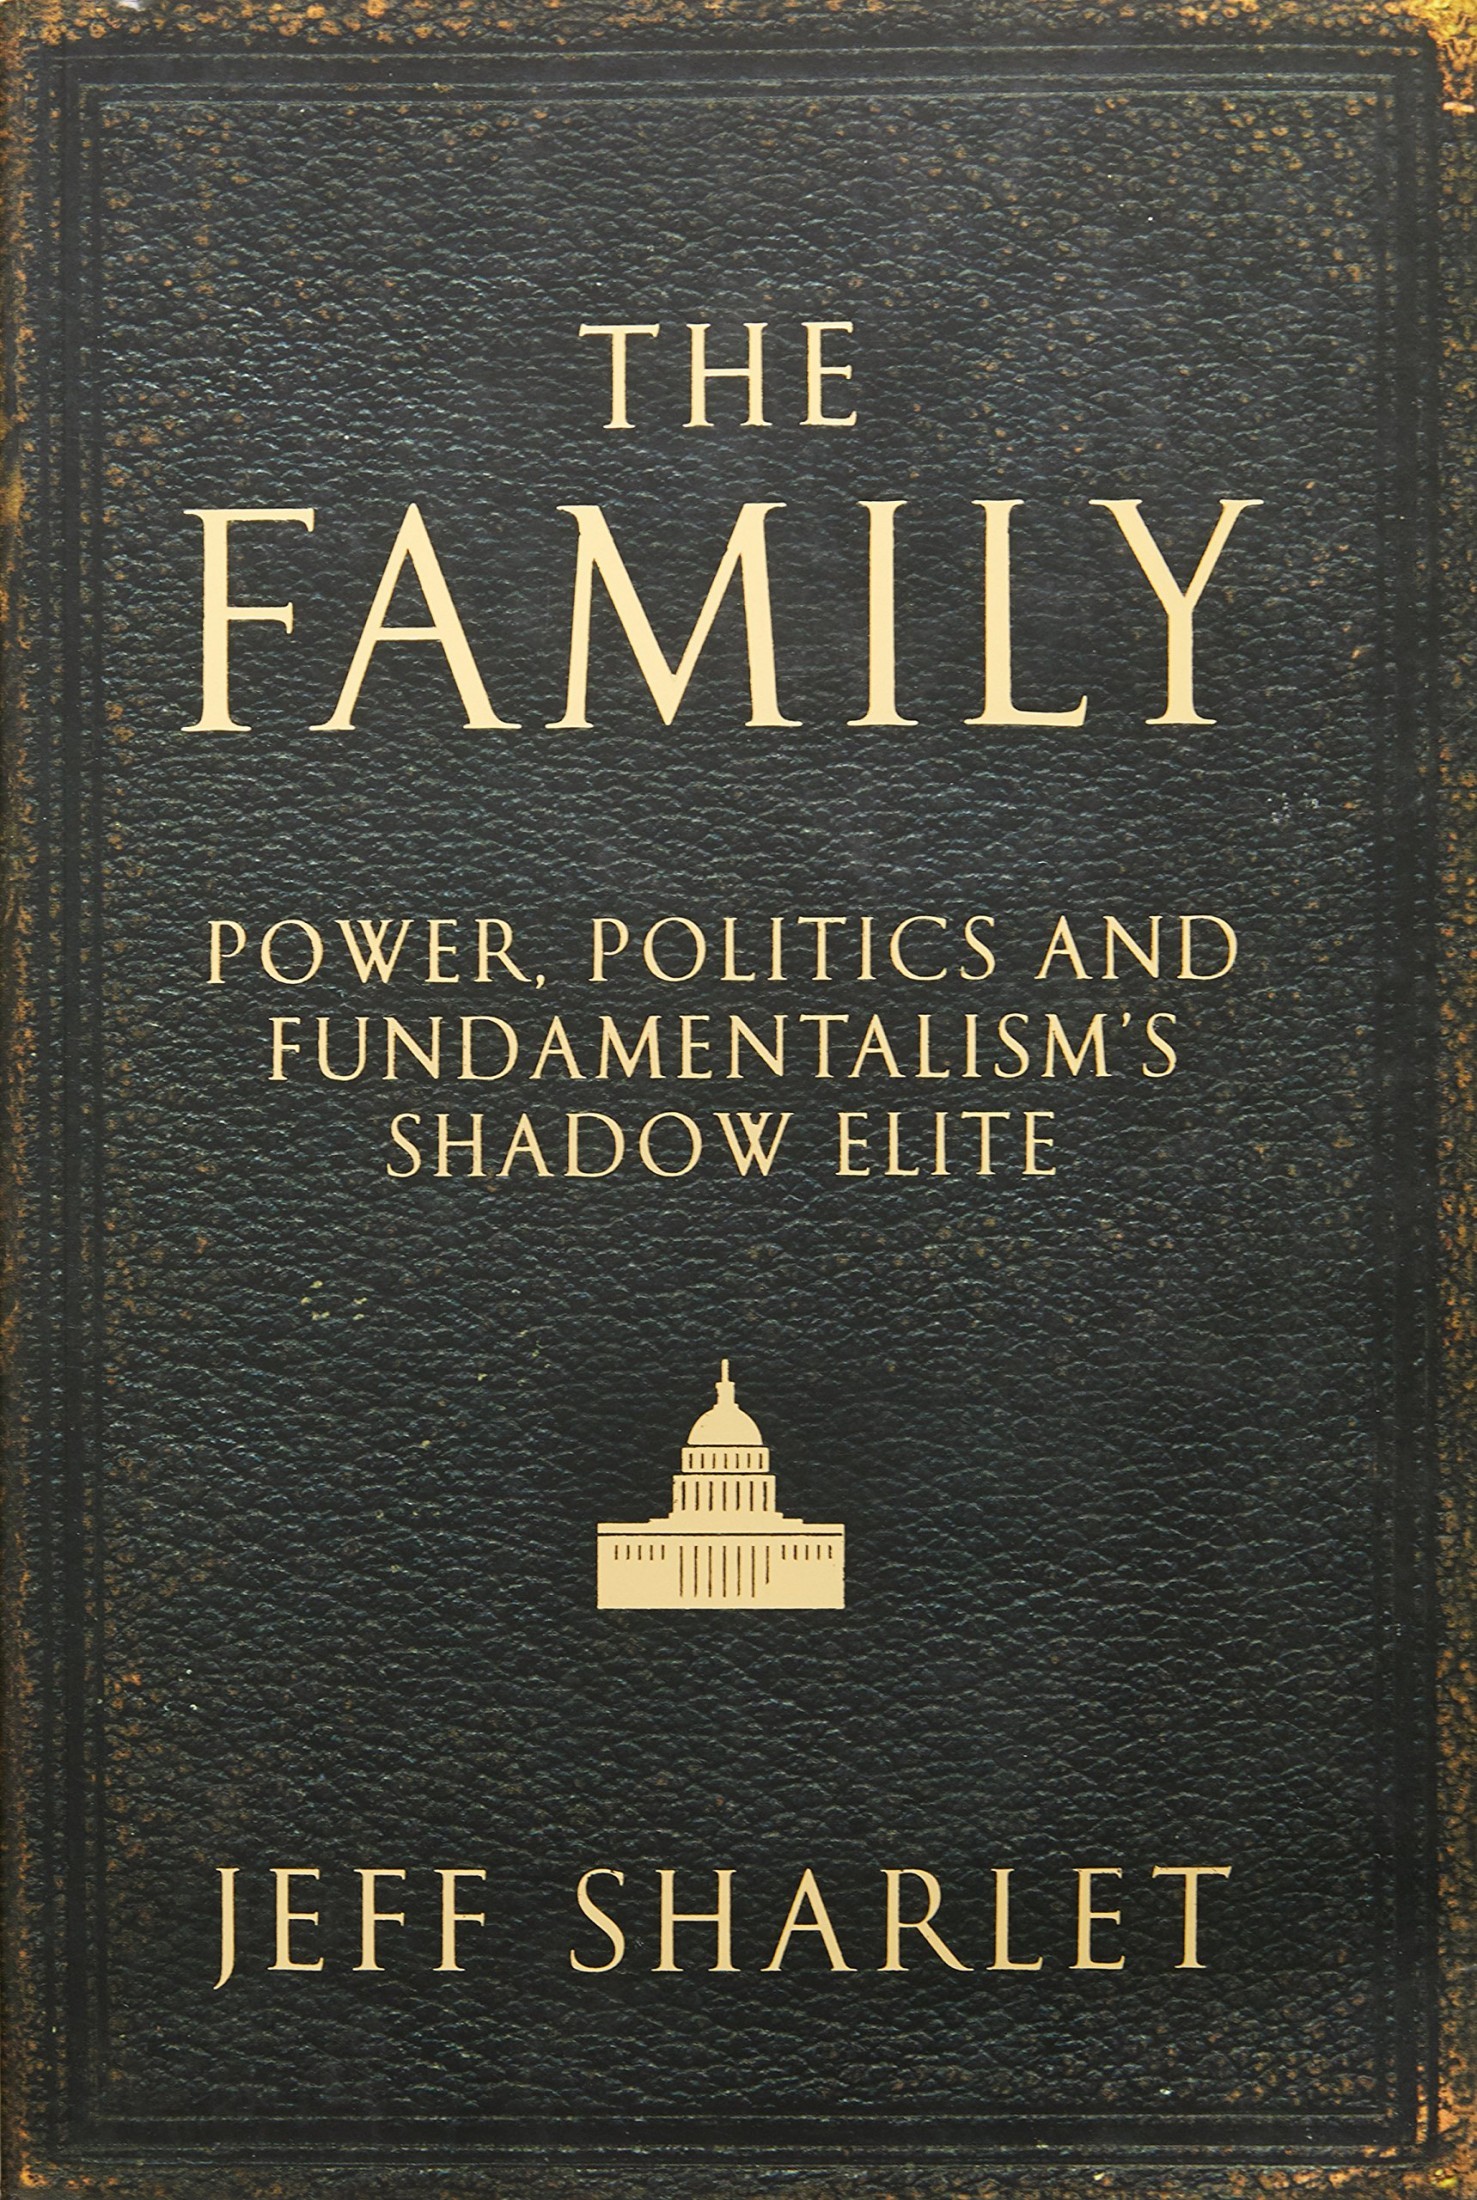 The Family: Where Fundamentalism, Power and Politics Meet